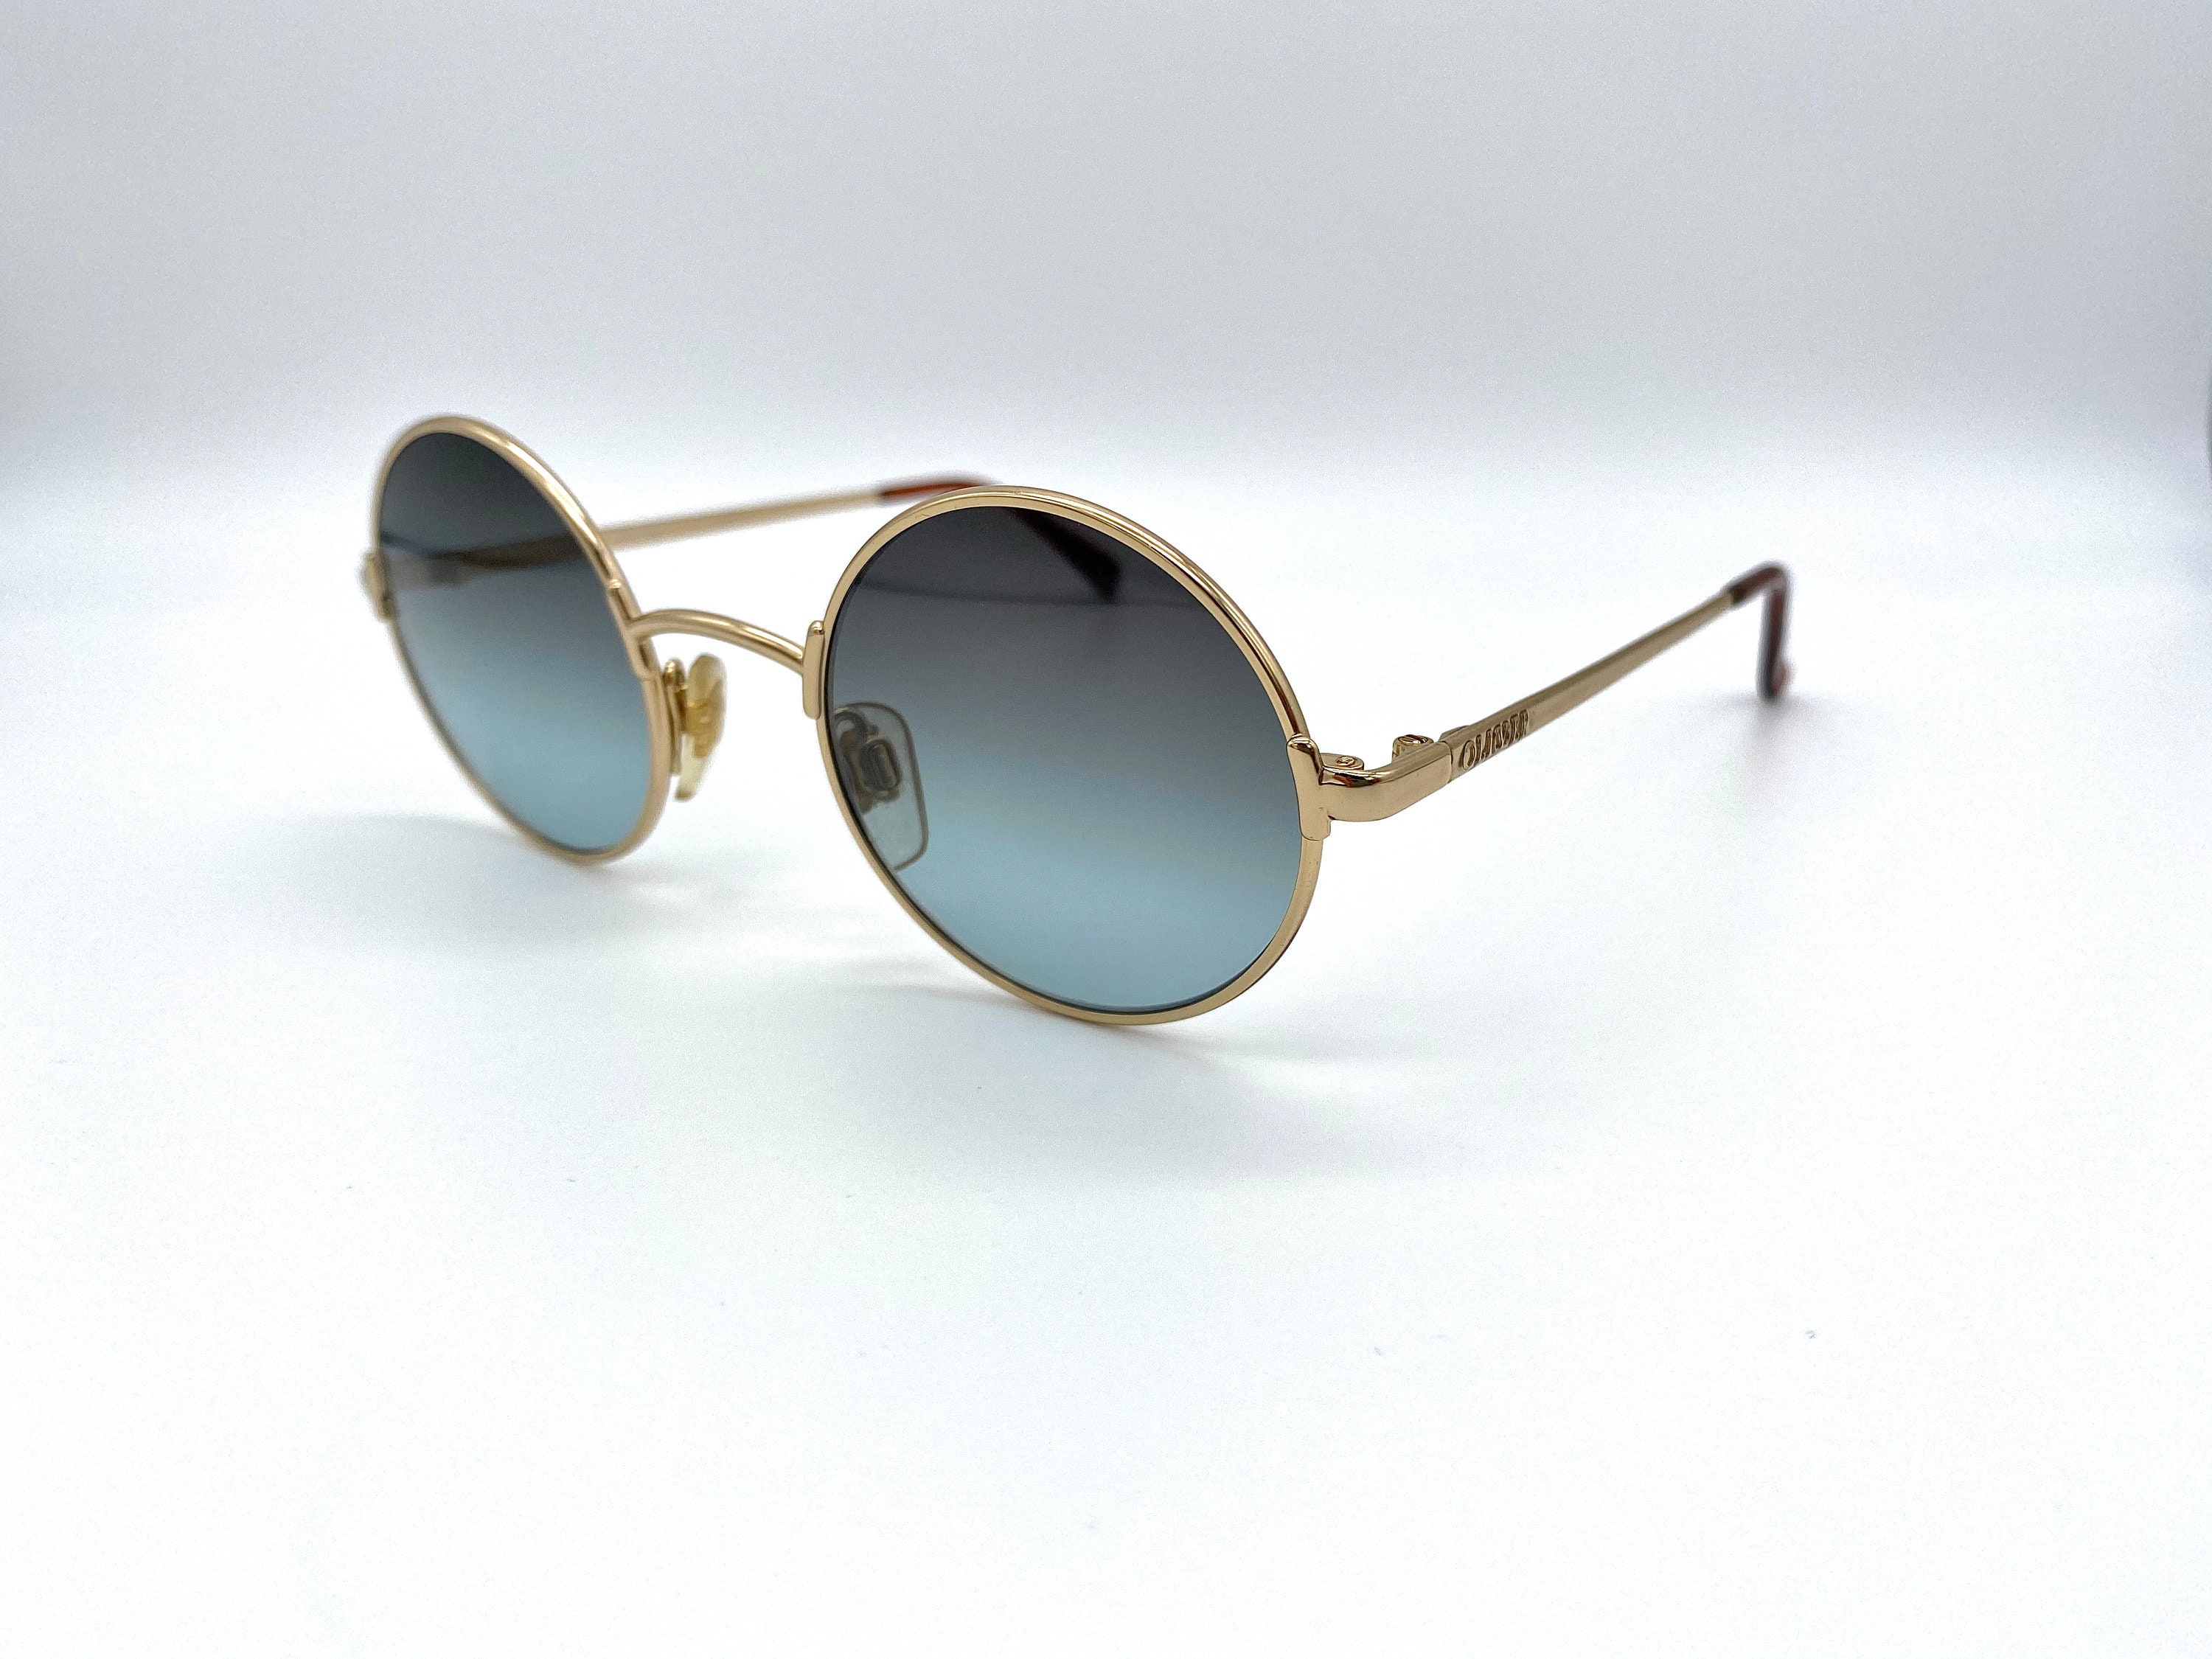 OLIVER by VALENTINO Mod. 1353 Vintage Sunglasses Made in Italy - Etsy